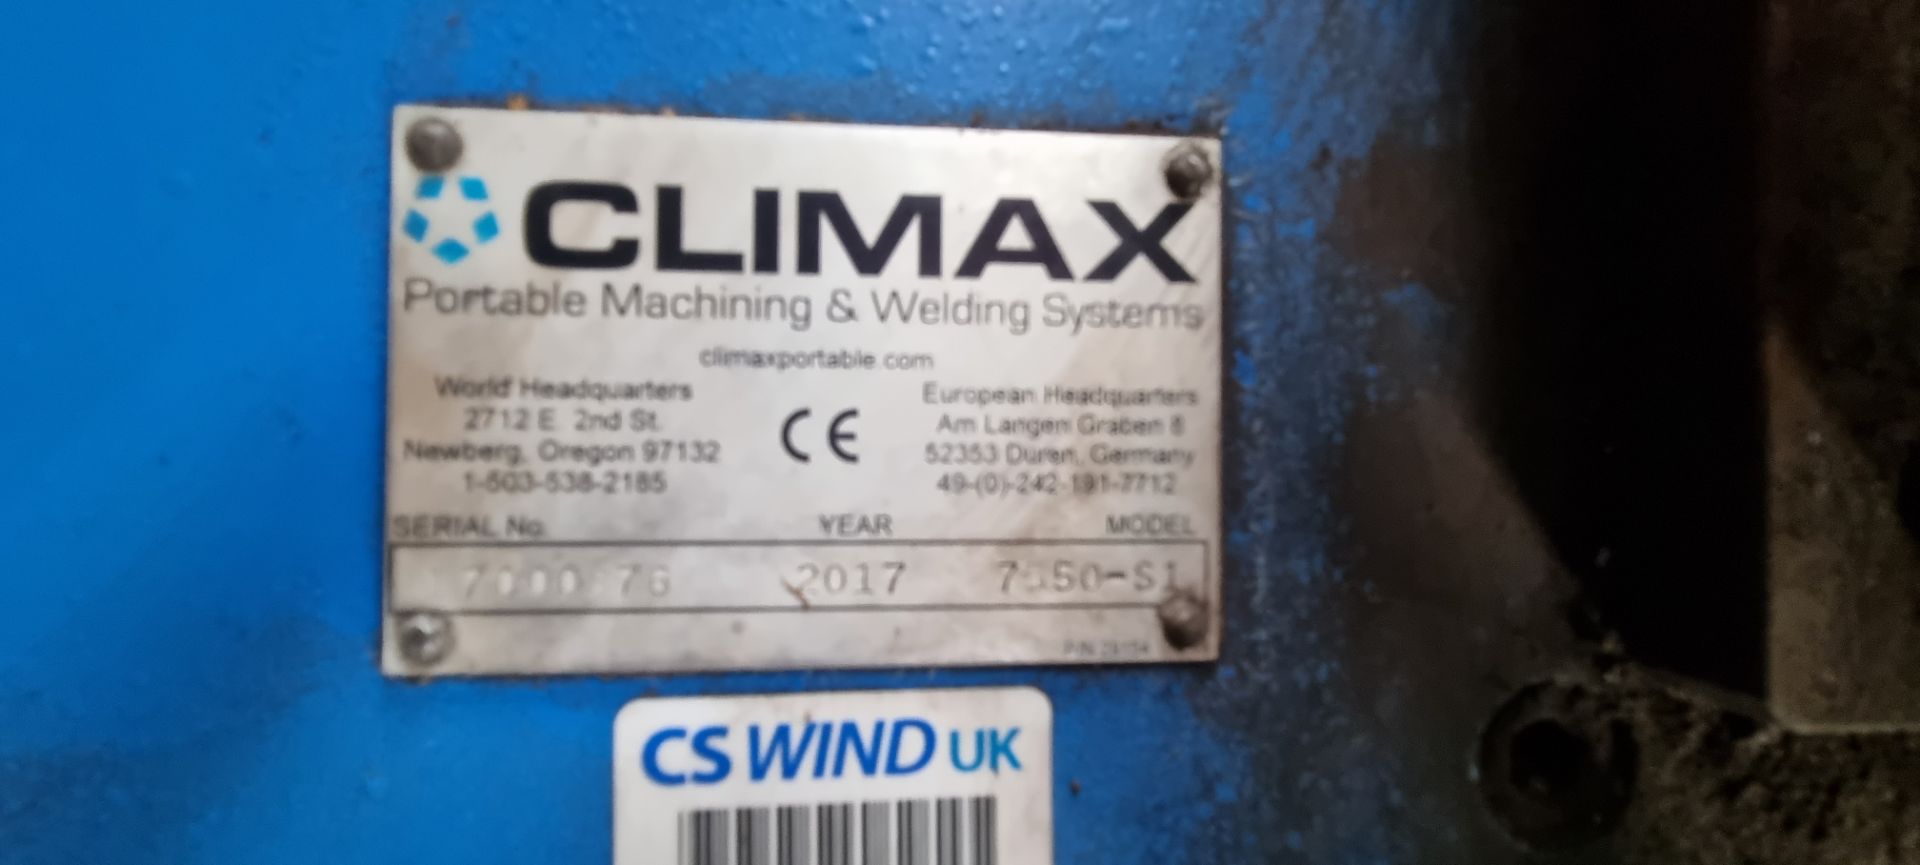 Climax 7550-51 Portable Circular Milling Machine. Serial number 1700876 (2017) - Image 7 of 8